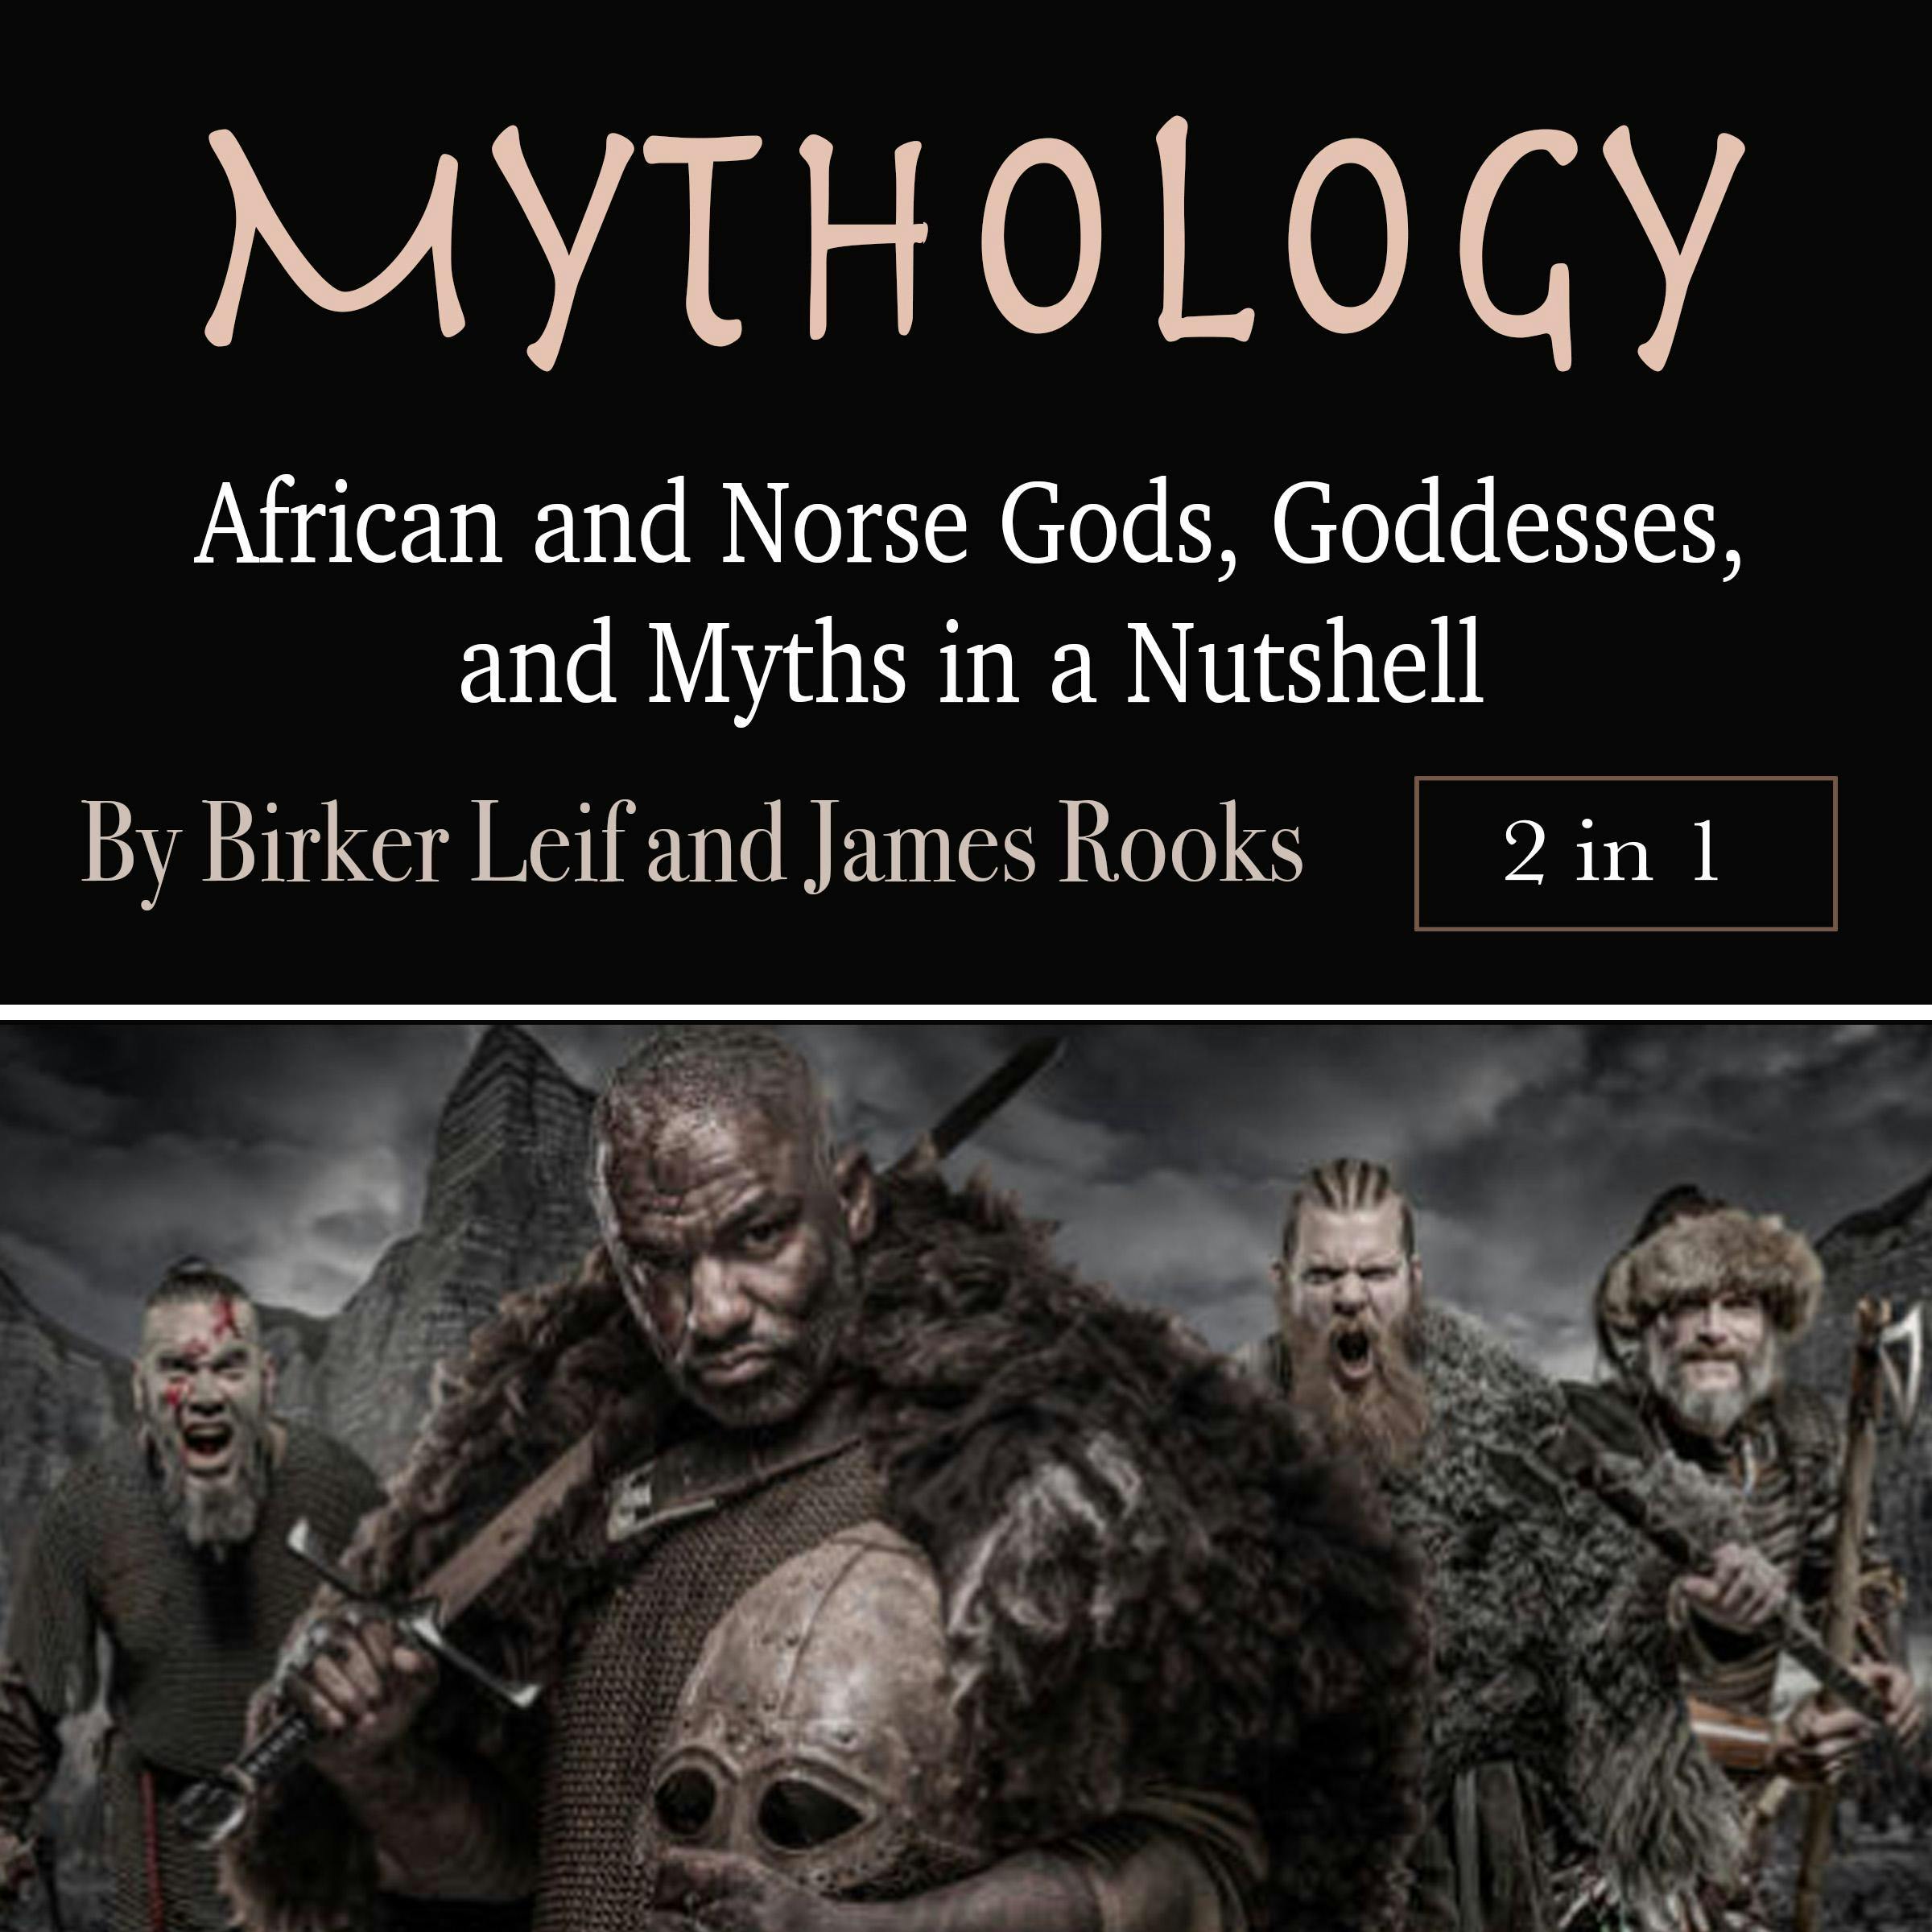 Mythology: African and Norse Gods, Goddesses, and Myths in a Nutshell - James Rooks, Birker Leif